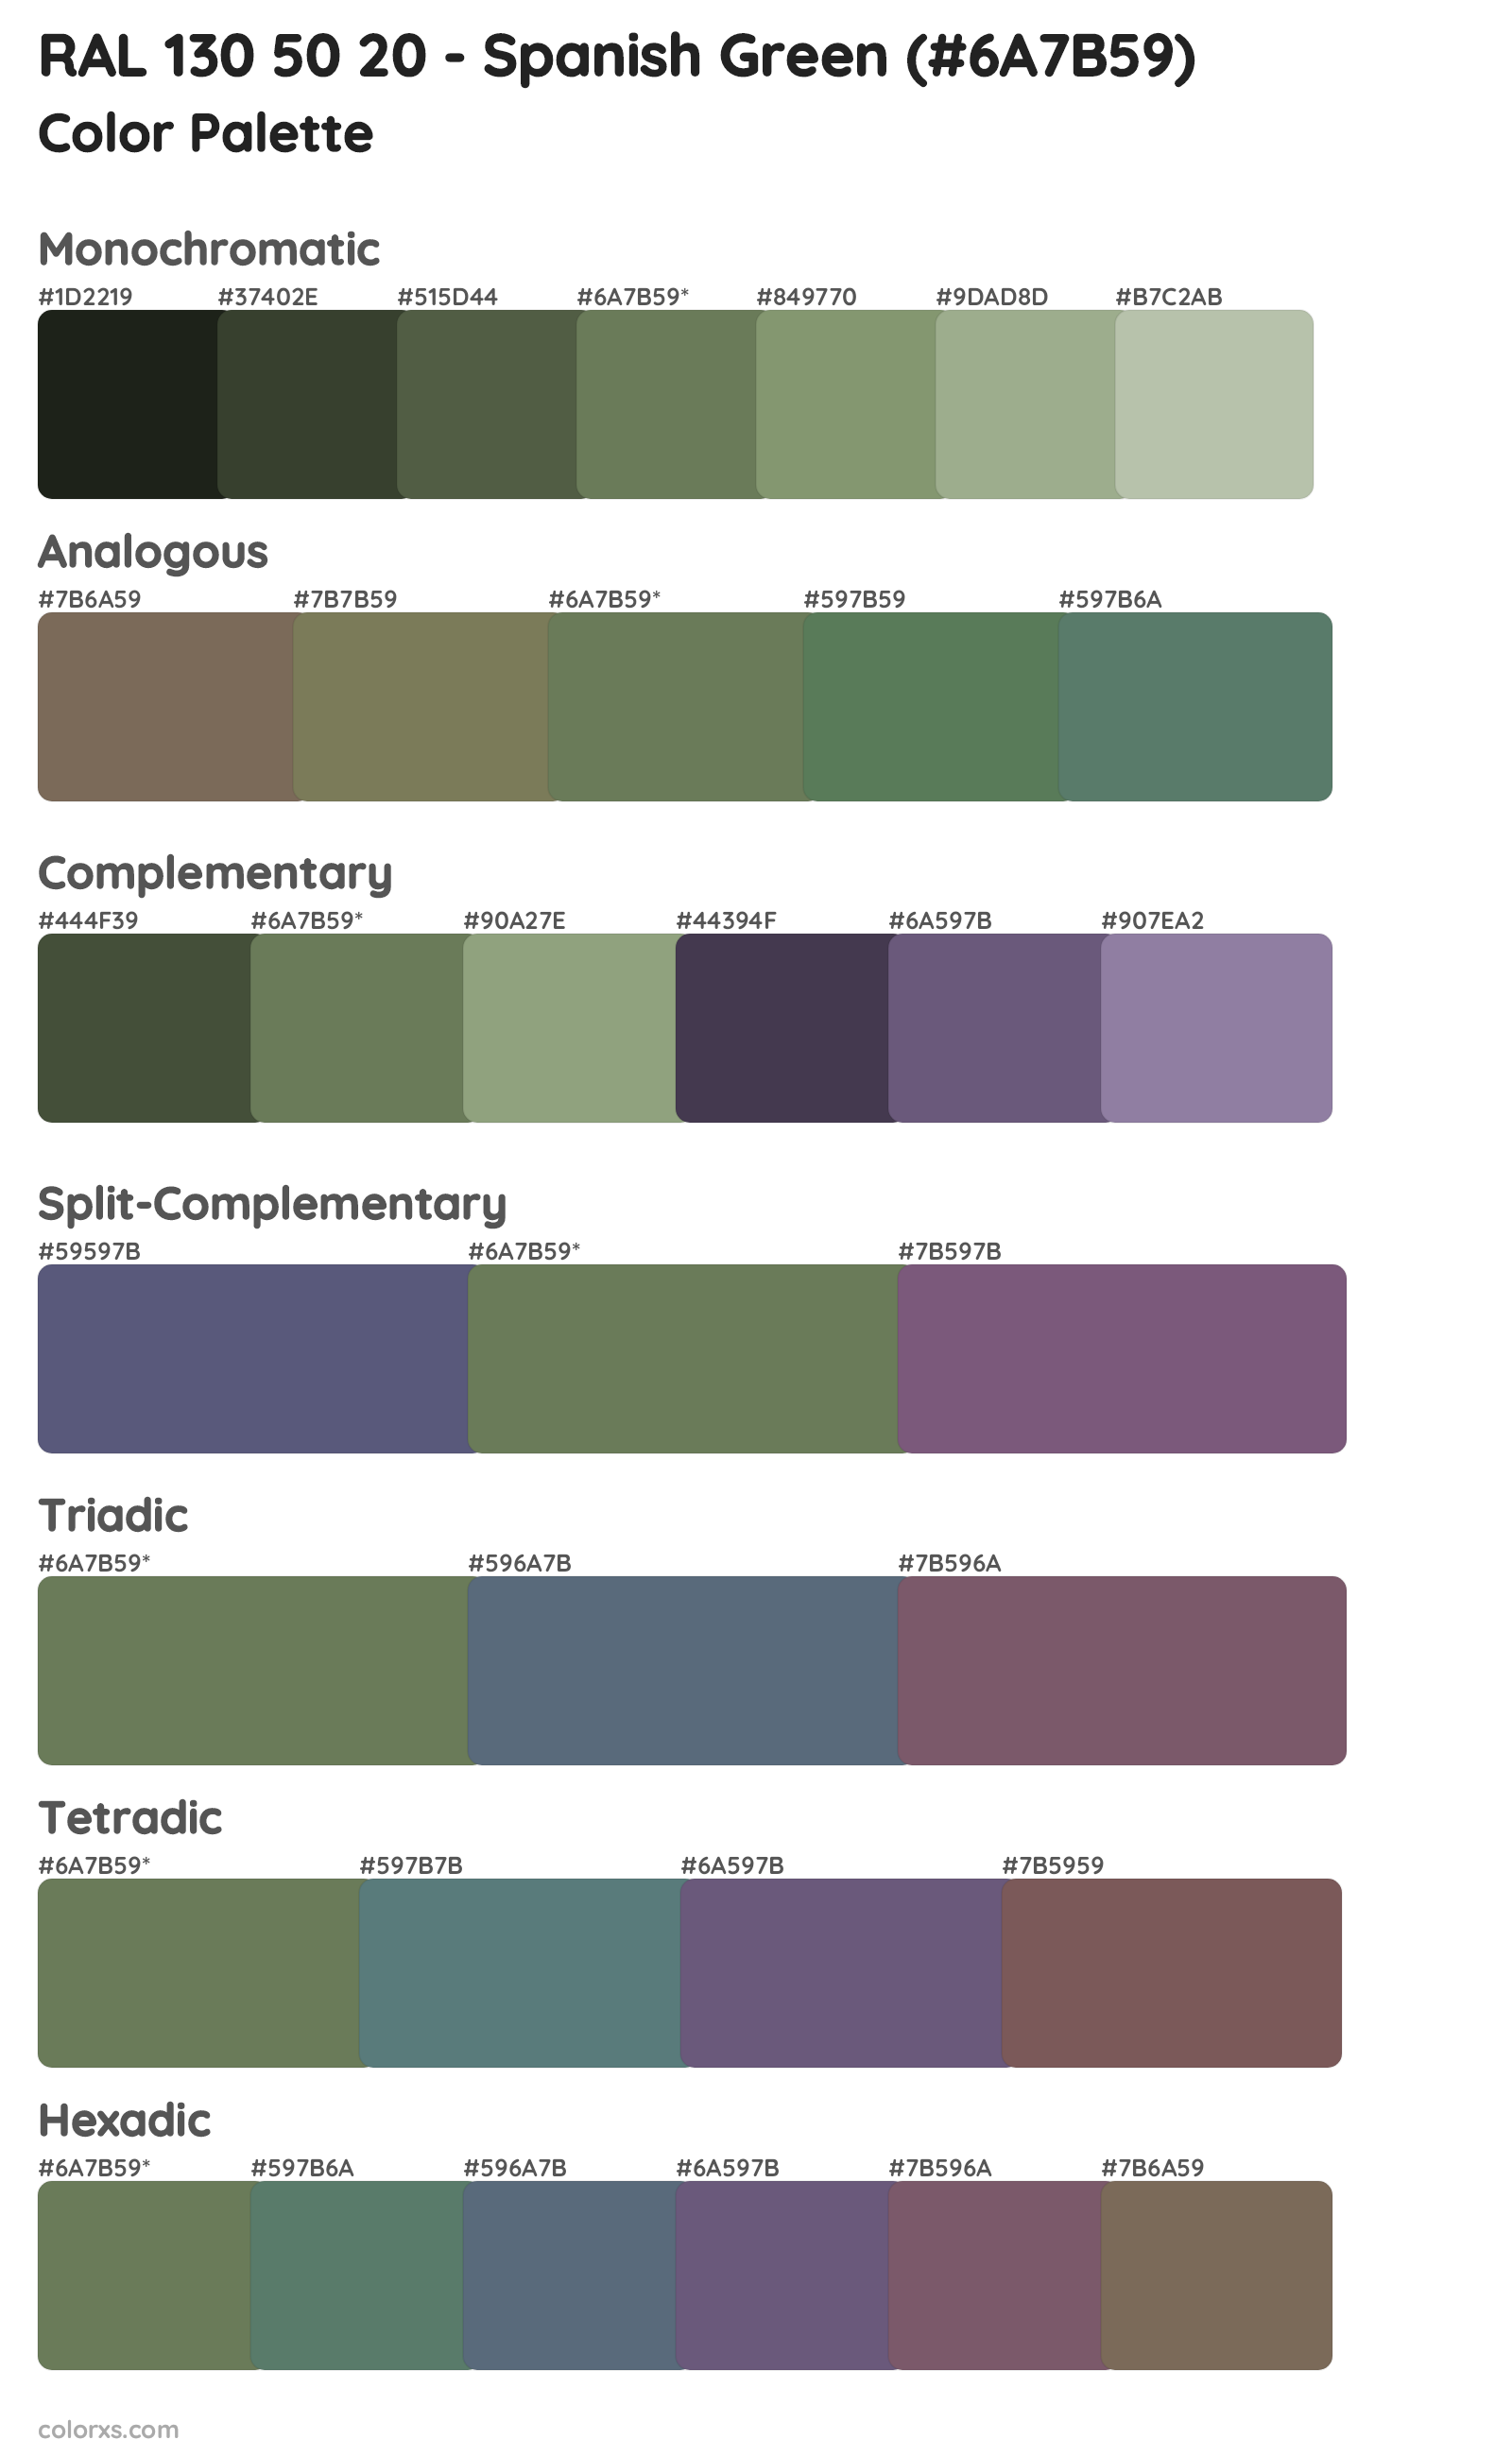 RAL 130 50 20 - Spanish Green Color Scheme Palettes